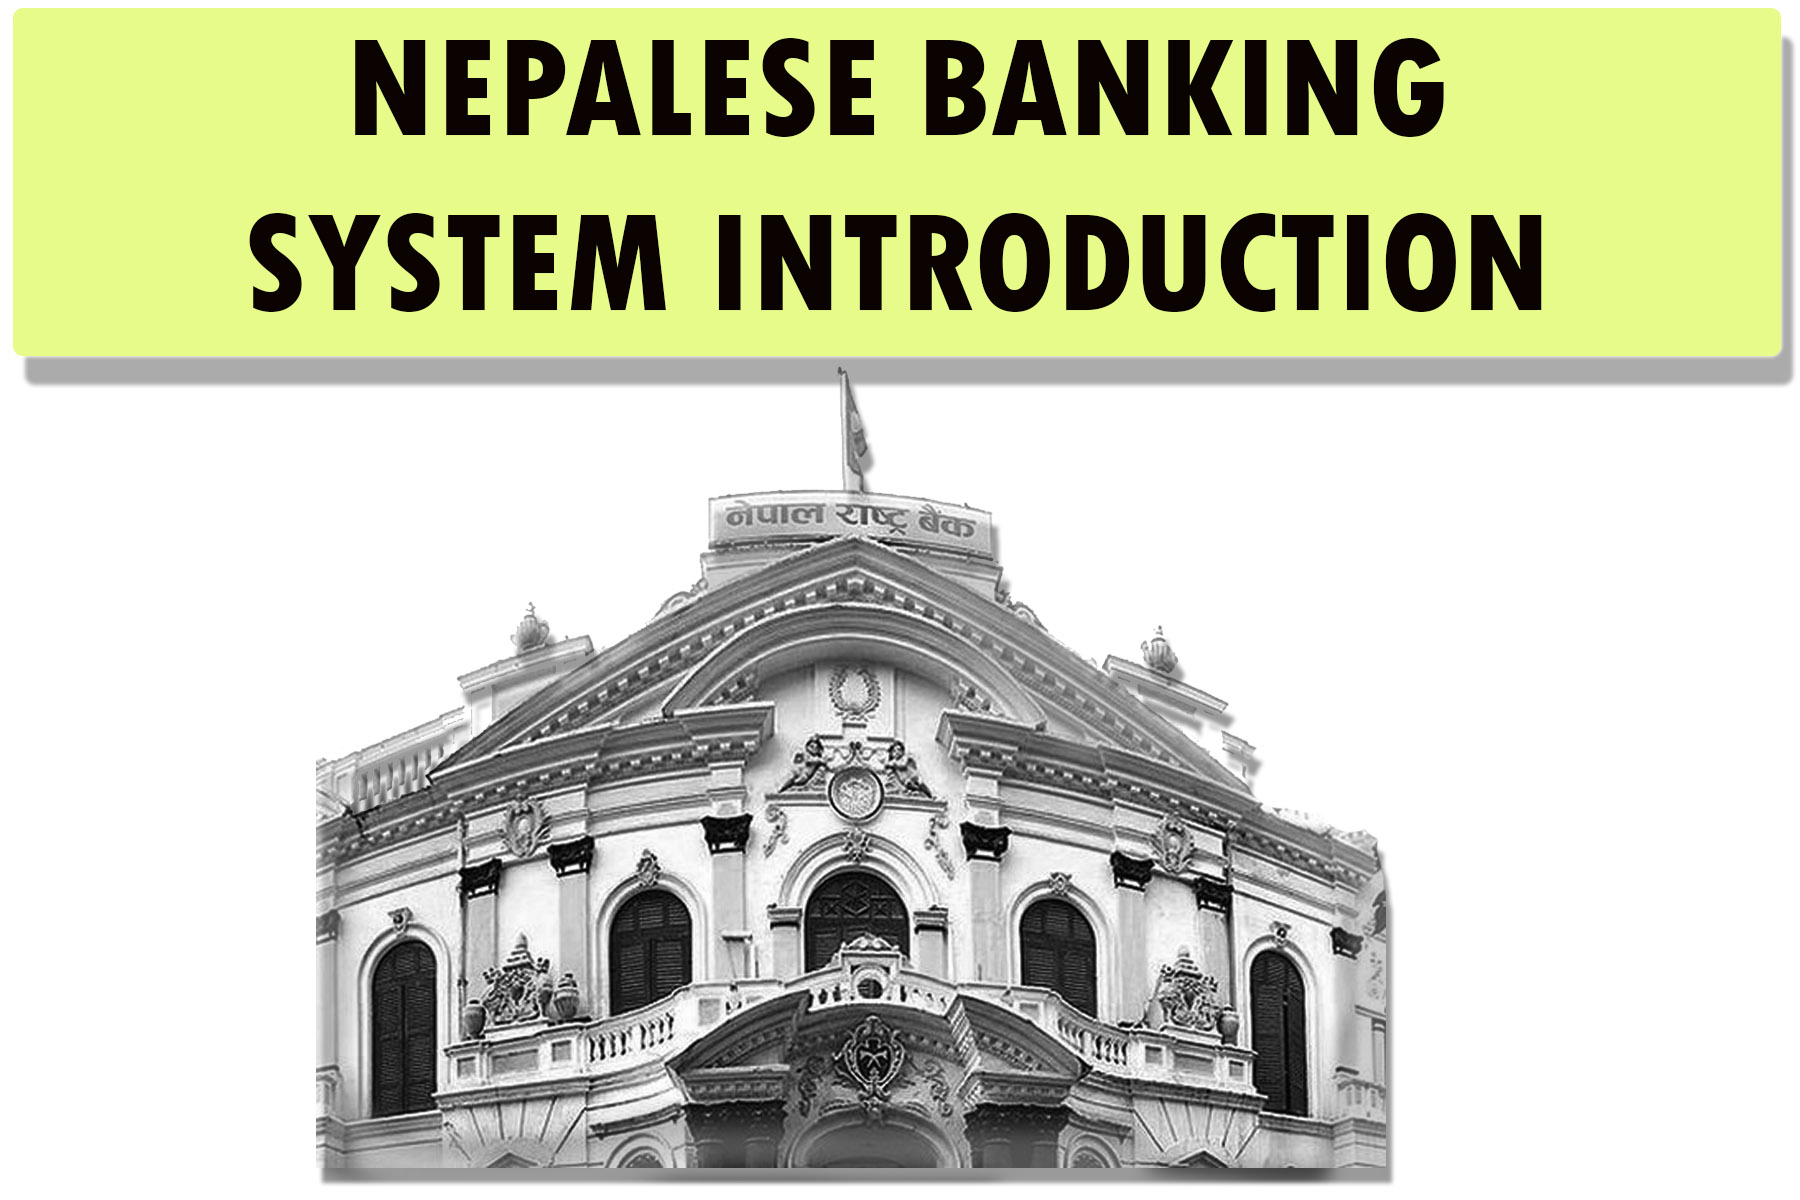 NEPALESE BANKING SYSTEM INTRODUCTION